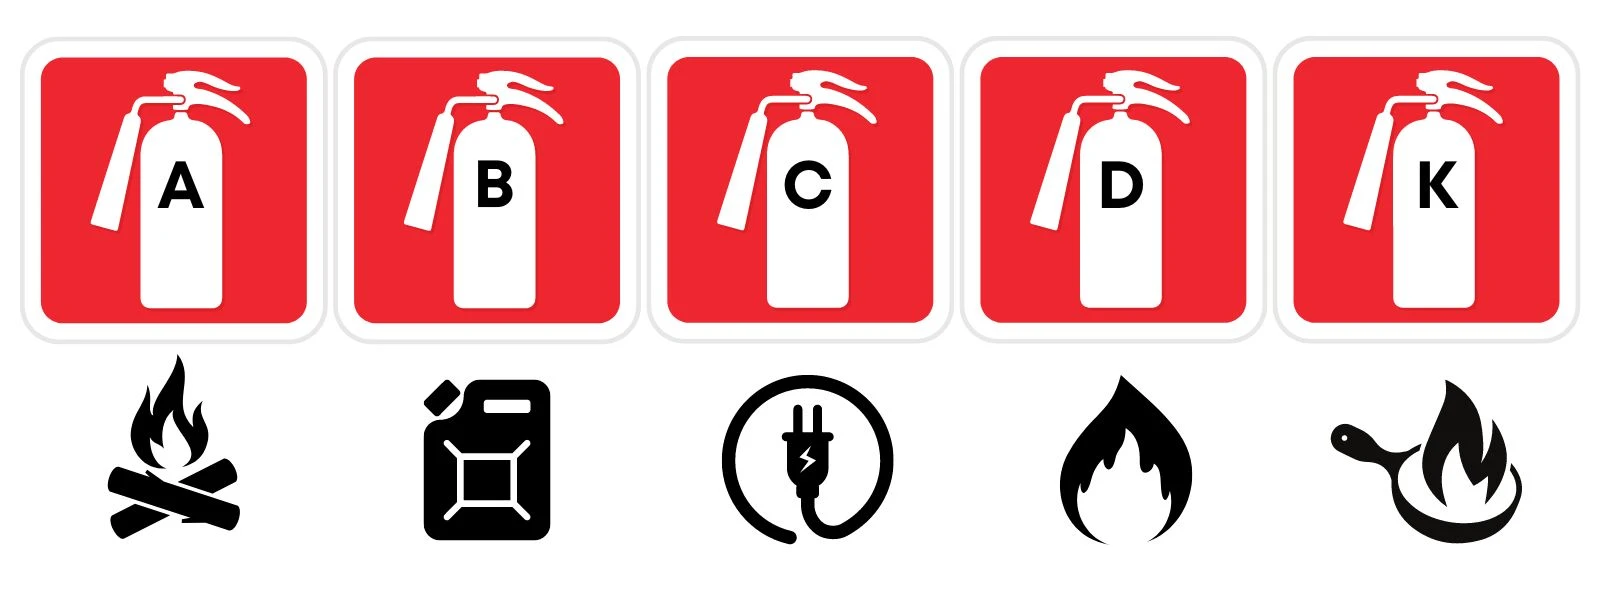 types-of-fire-extinguisher-letters-and-symbols